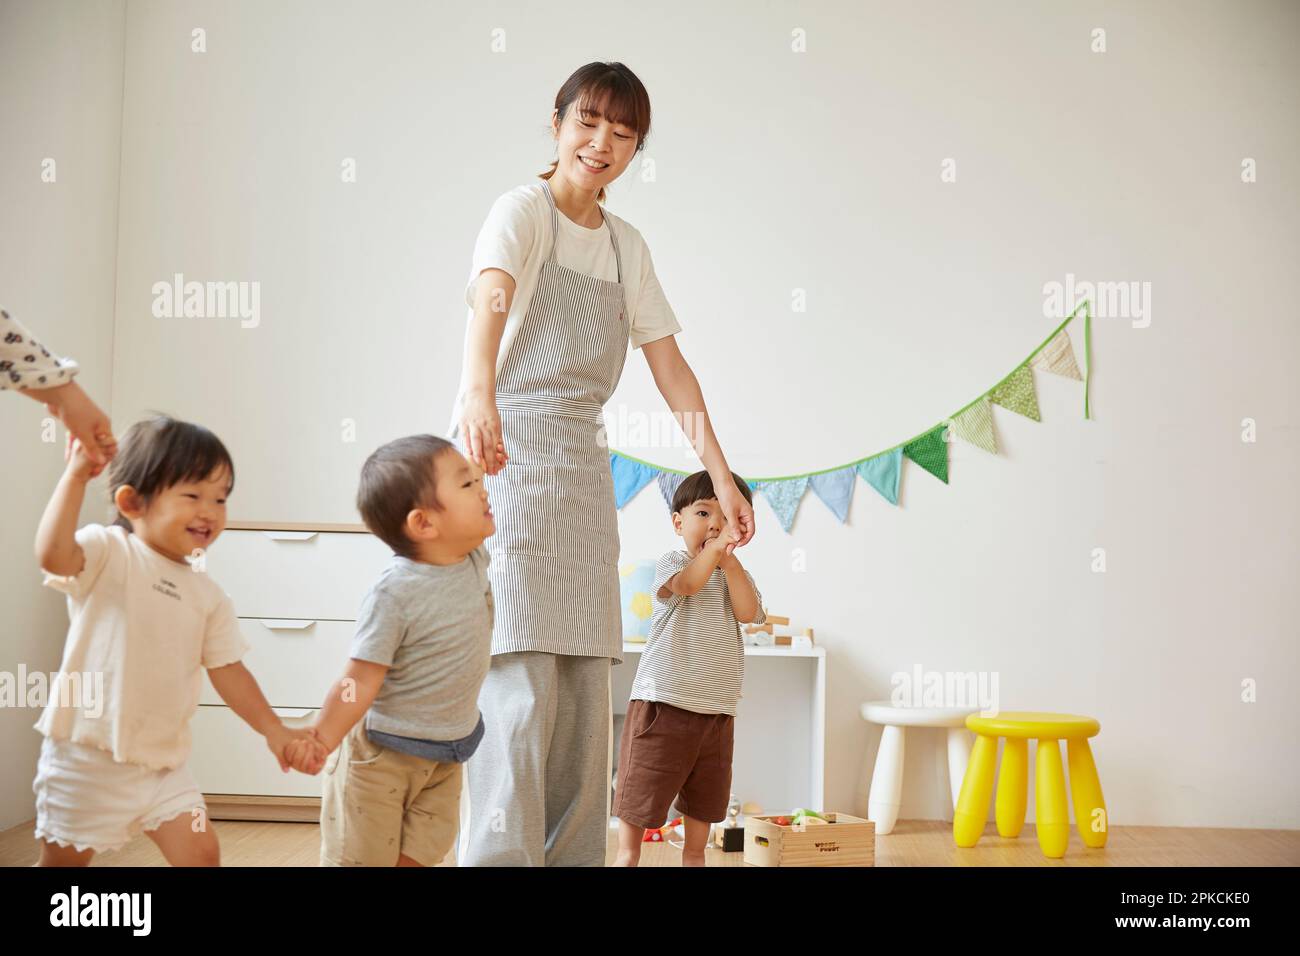 Child care worker taking care of children at a daycare center Stock Photo